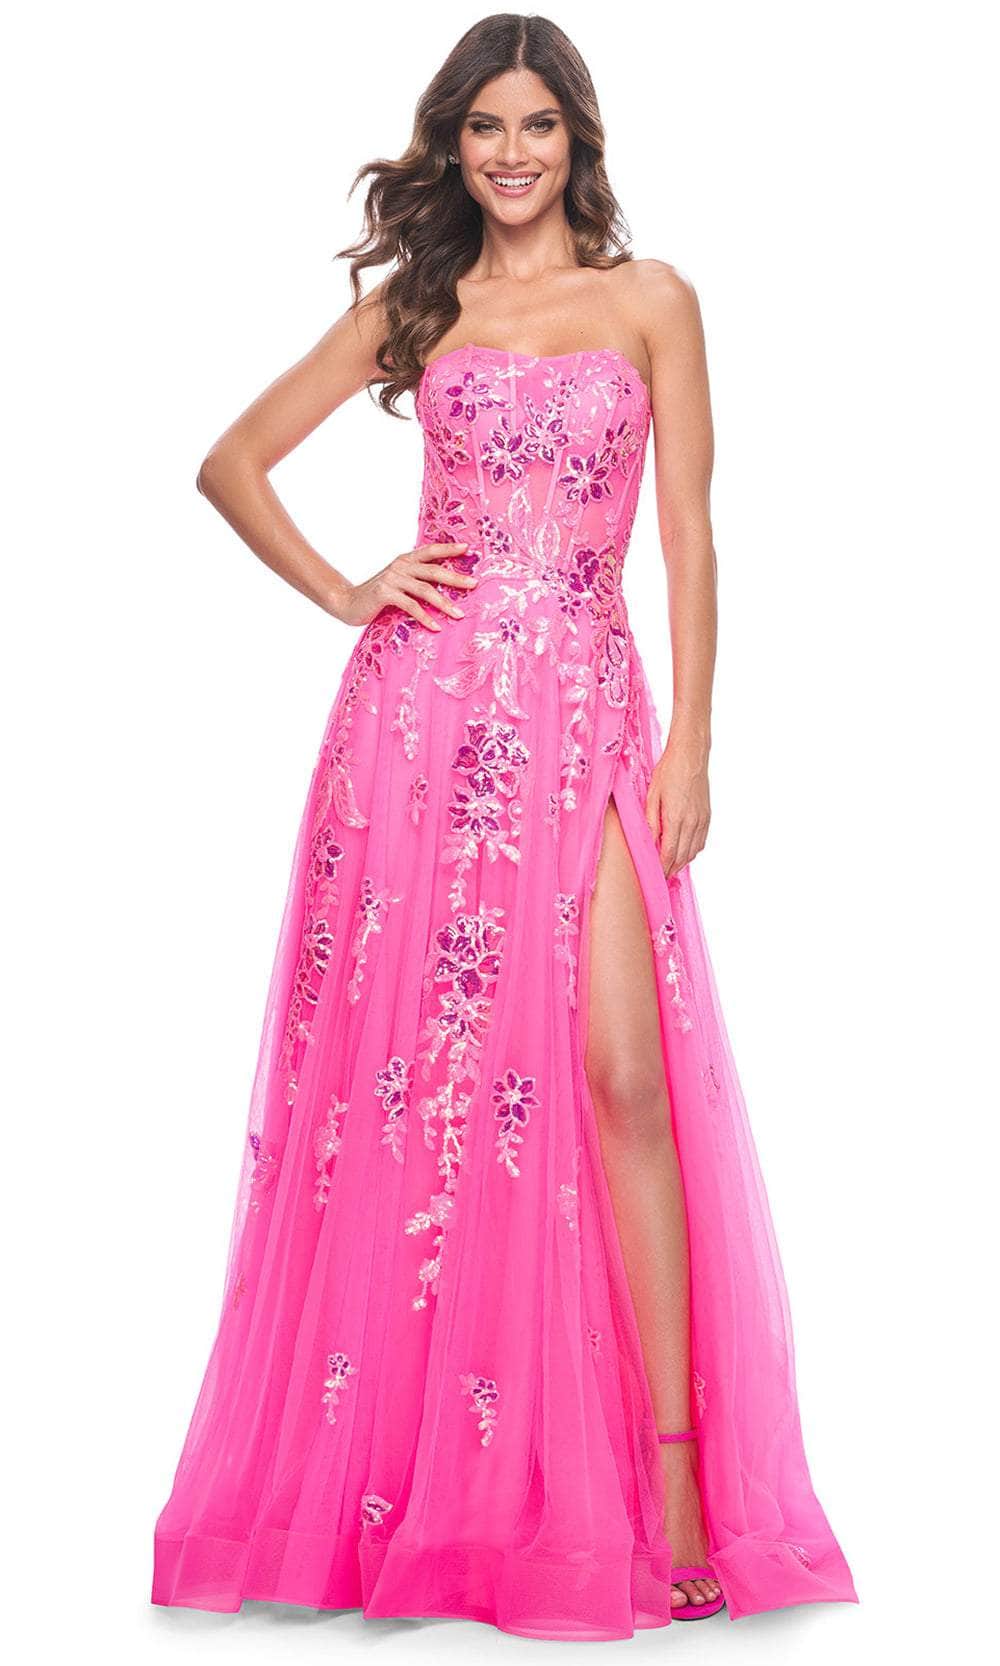 Image of La Femme 32137 - Strapless Sequin Floral Prom Gown